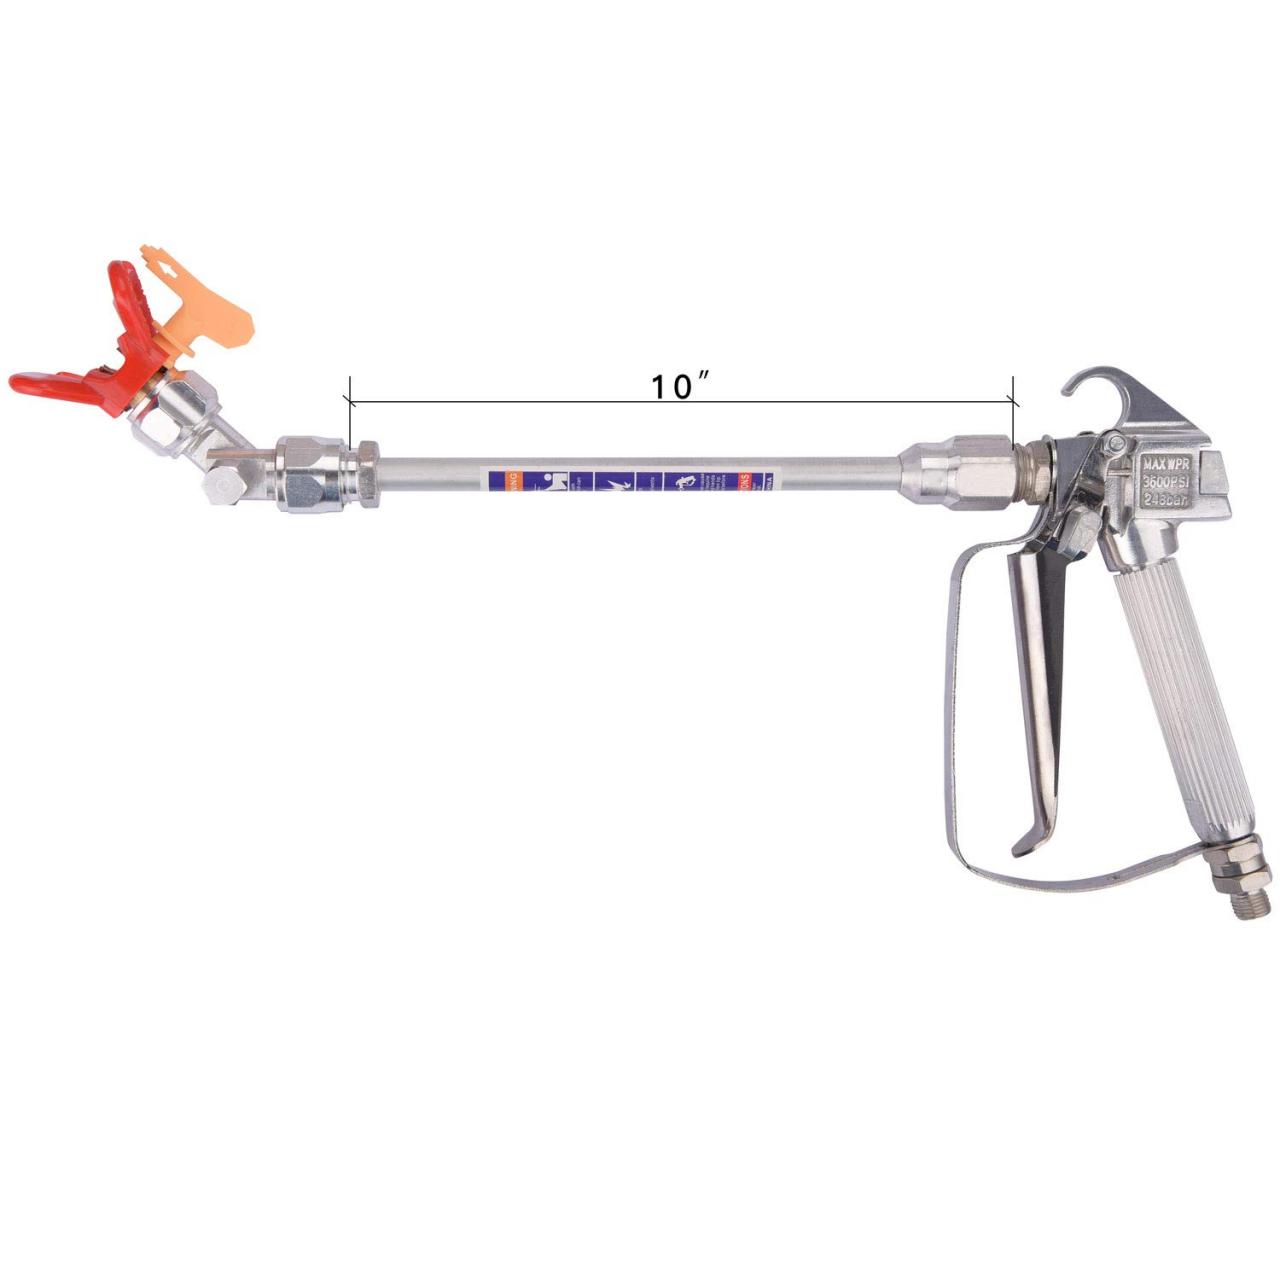 DUSICHIN DUS-137 Airless Paint Spray Gun, High Pressure 3600 PSI 517 TIP  Swivel Joint with 10 inches Extension Pole and Universal Joints- Buy Online  in Antigua and Barbuda at antigua.desertcart.com. ProductId : 160438434.